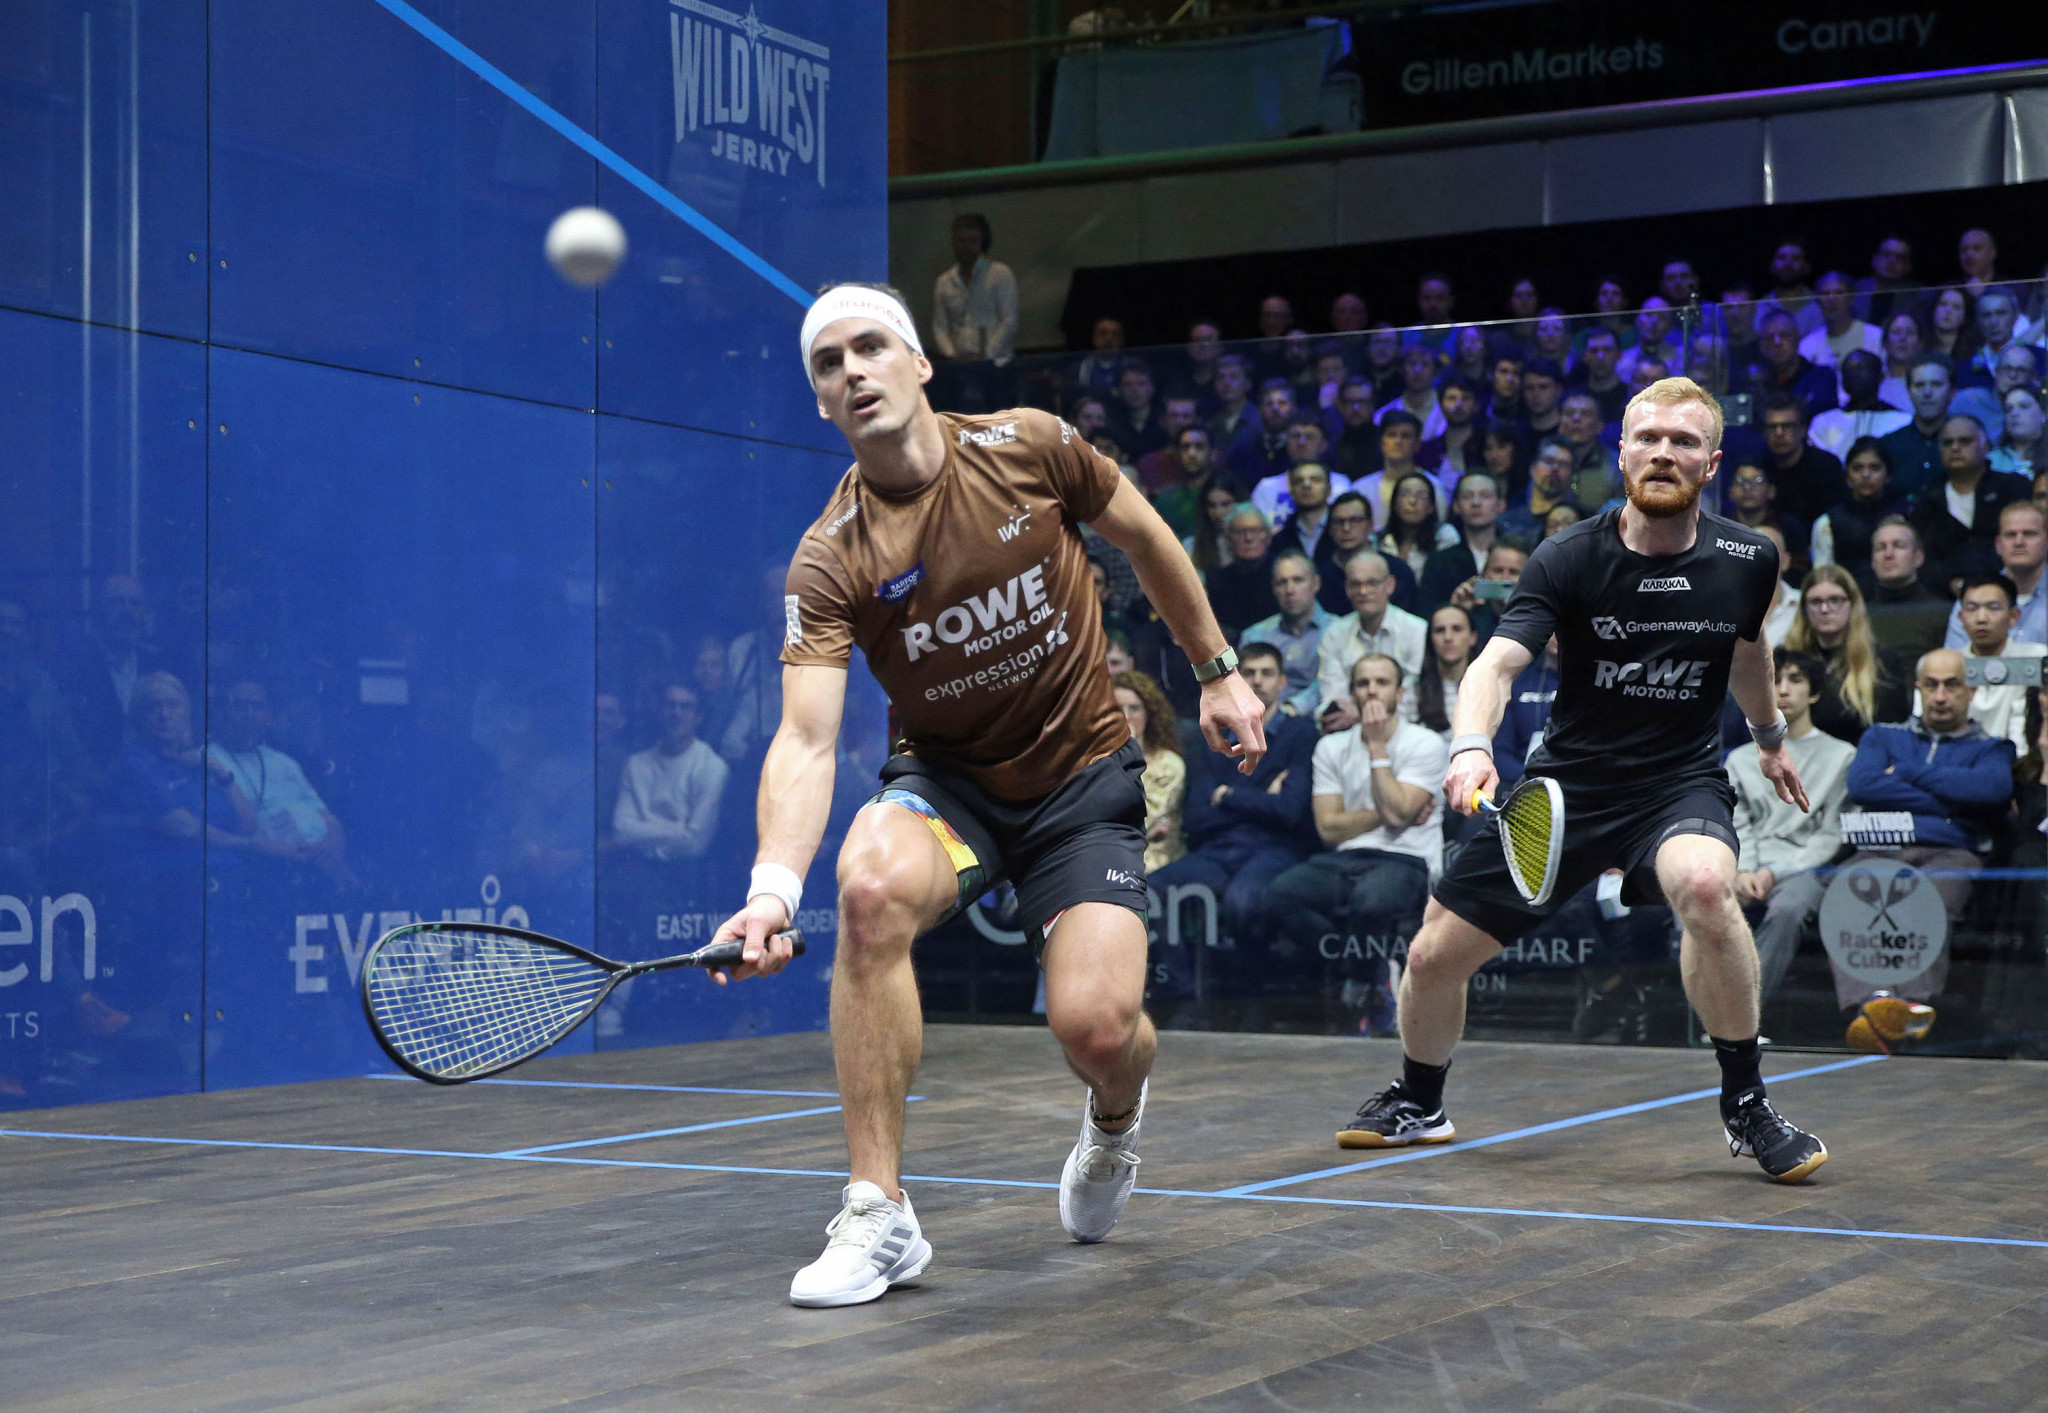 Coll, left, claimed the PSA Canary Wharf Classic title in London, ending the fairytale run of his Welsh opponent Joel Makin, right ©PSA World Tour 